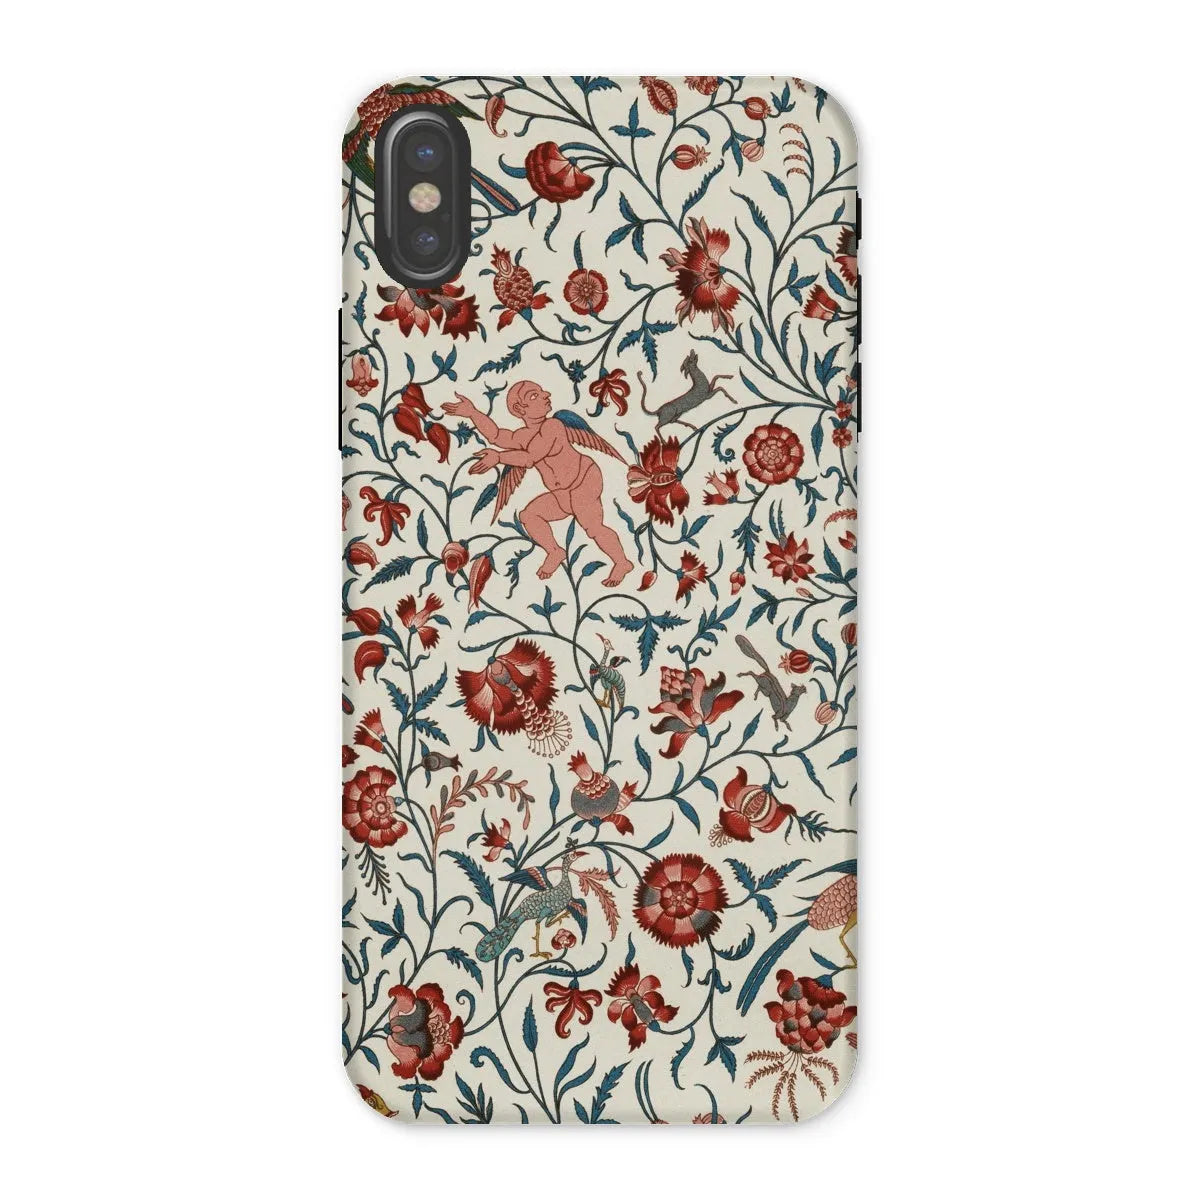 Persian Pattern From L’ornement Polychrome By Auguste Racinet Tough Phone Case - Iphone x / Matte - Mobile Phone